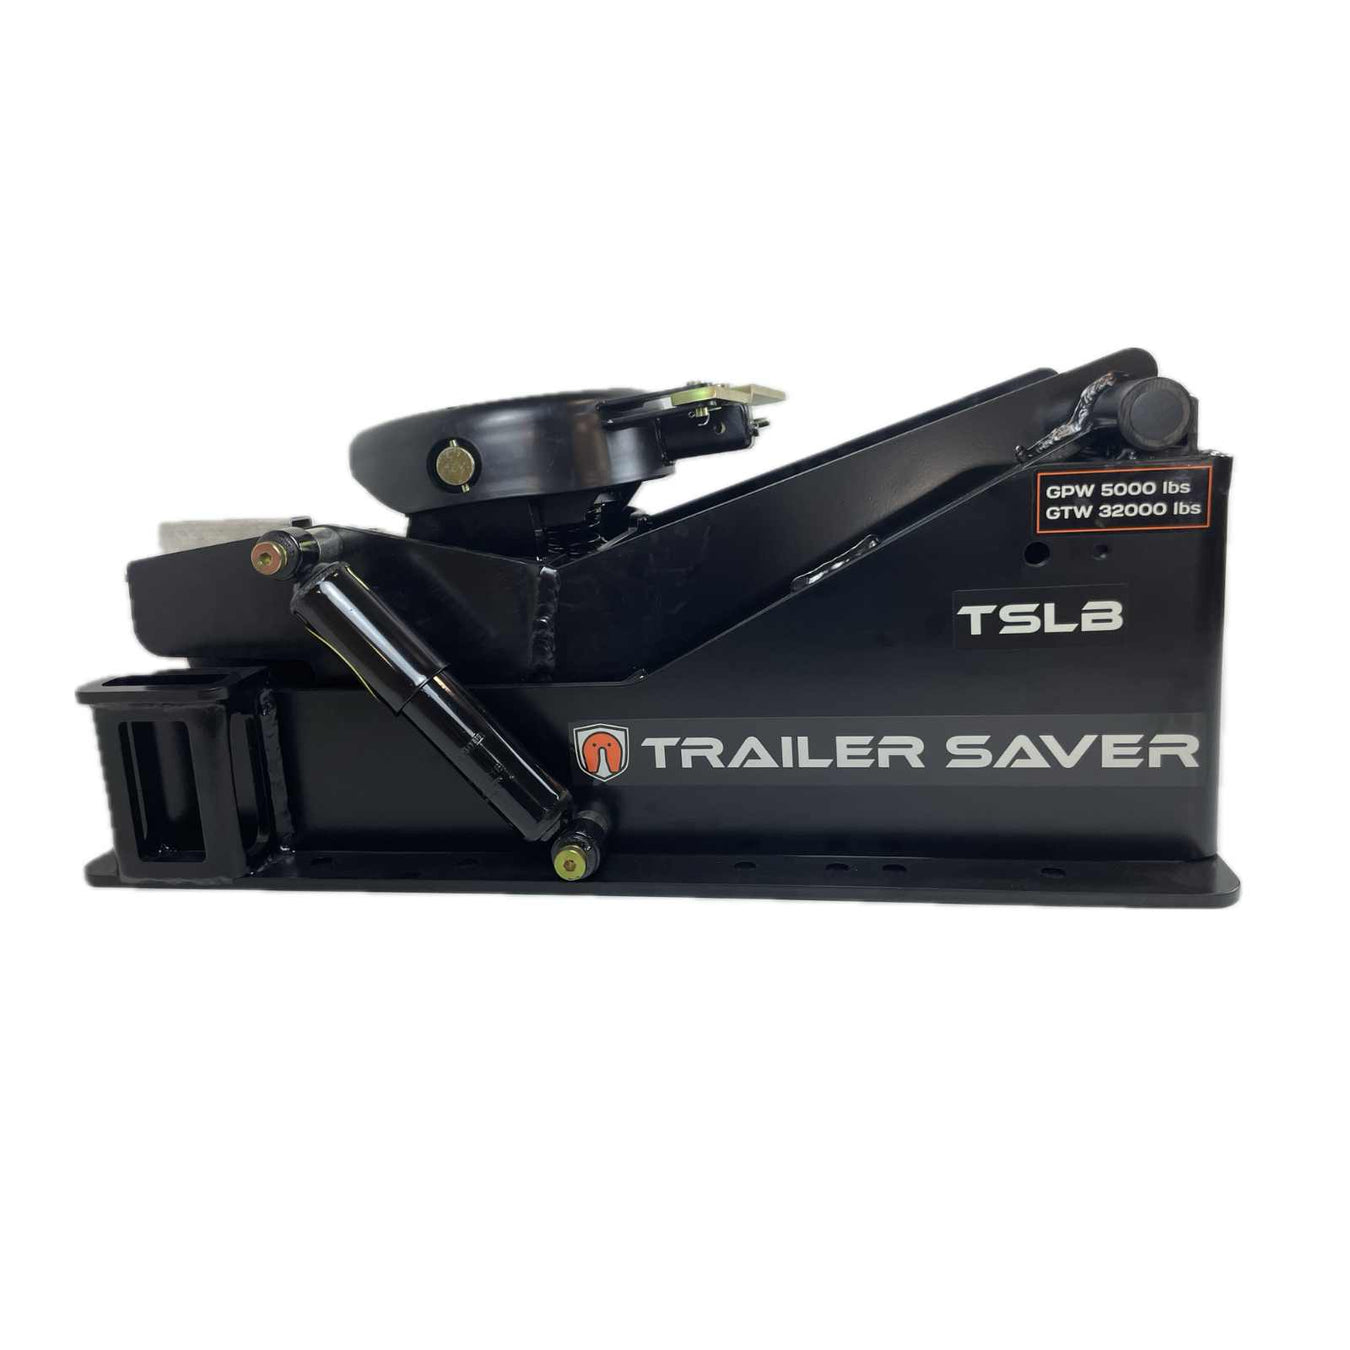 TrailerSaver 5th-Wheel Hitches